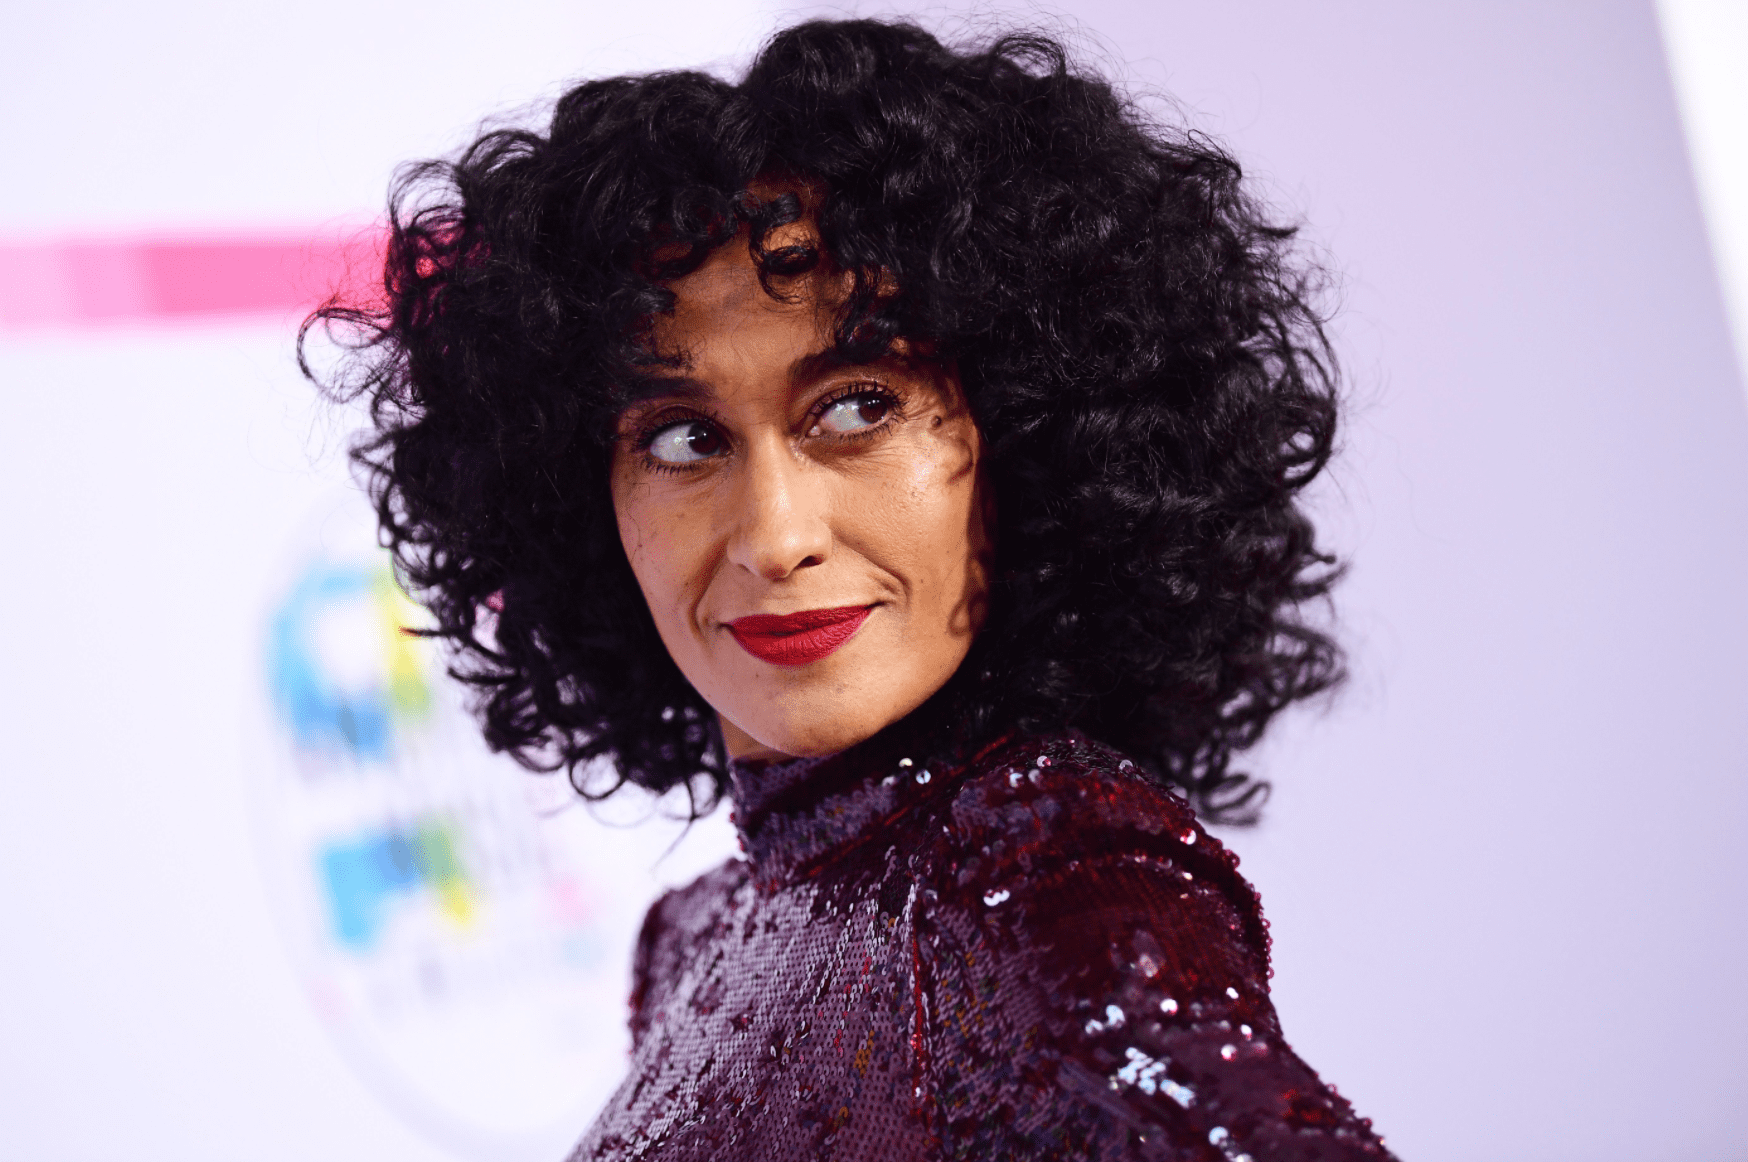 Tracee Ellis Ross at the 2017 American Music Awards at Microsoft Theater on November 19, 2017. | Source: Getty Images